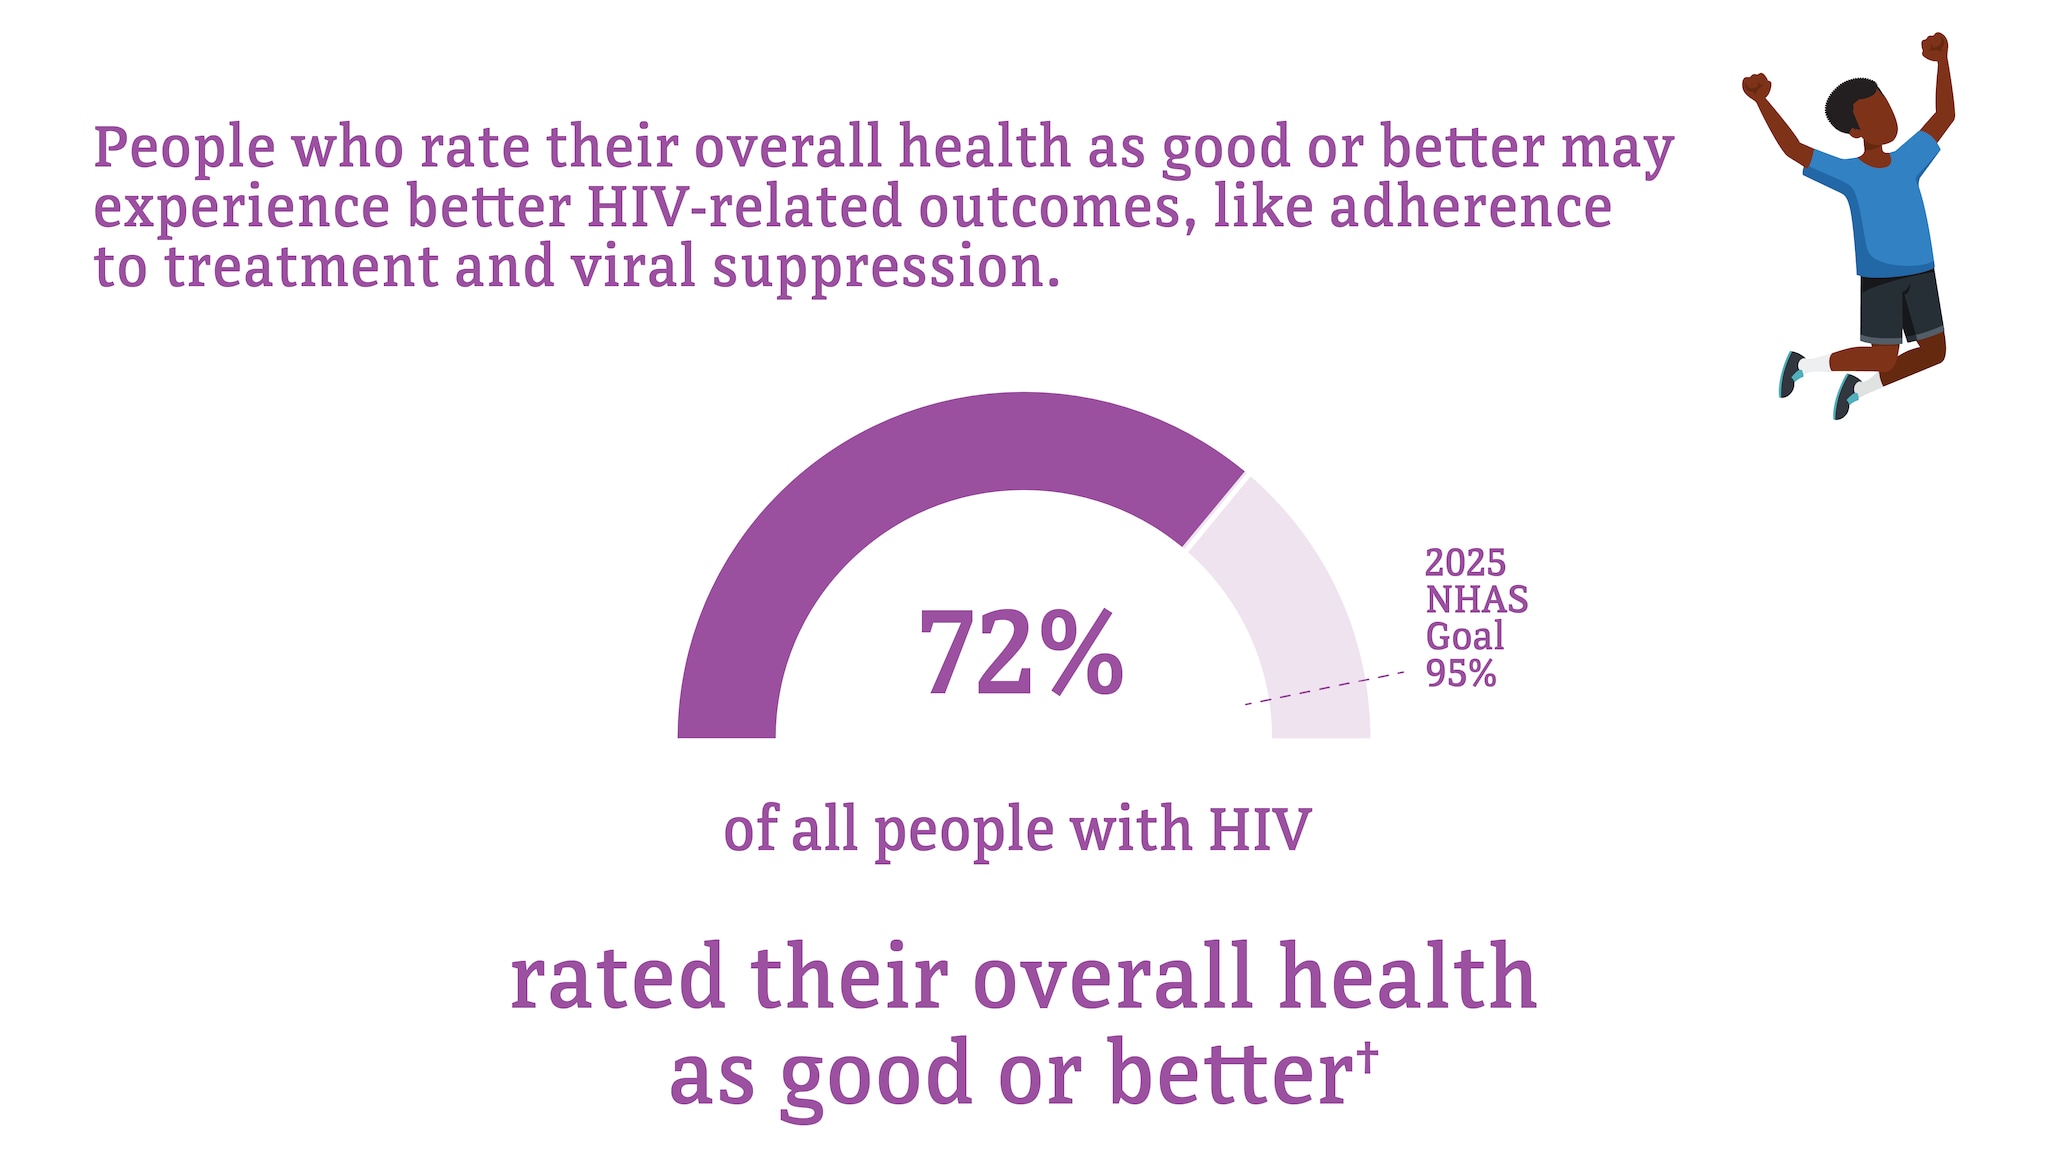 People who rate their overall health as good or better may experience better HIV-related outcomes, like adherence to treatment and viral suppression. In 2020, 72 percent of all people with HIV rated their overall health as good or better. The 2025 NHAS goal is 95 percent.